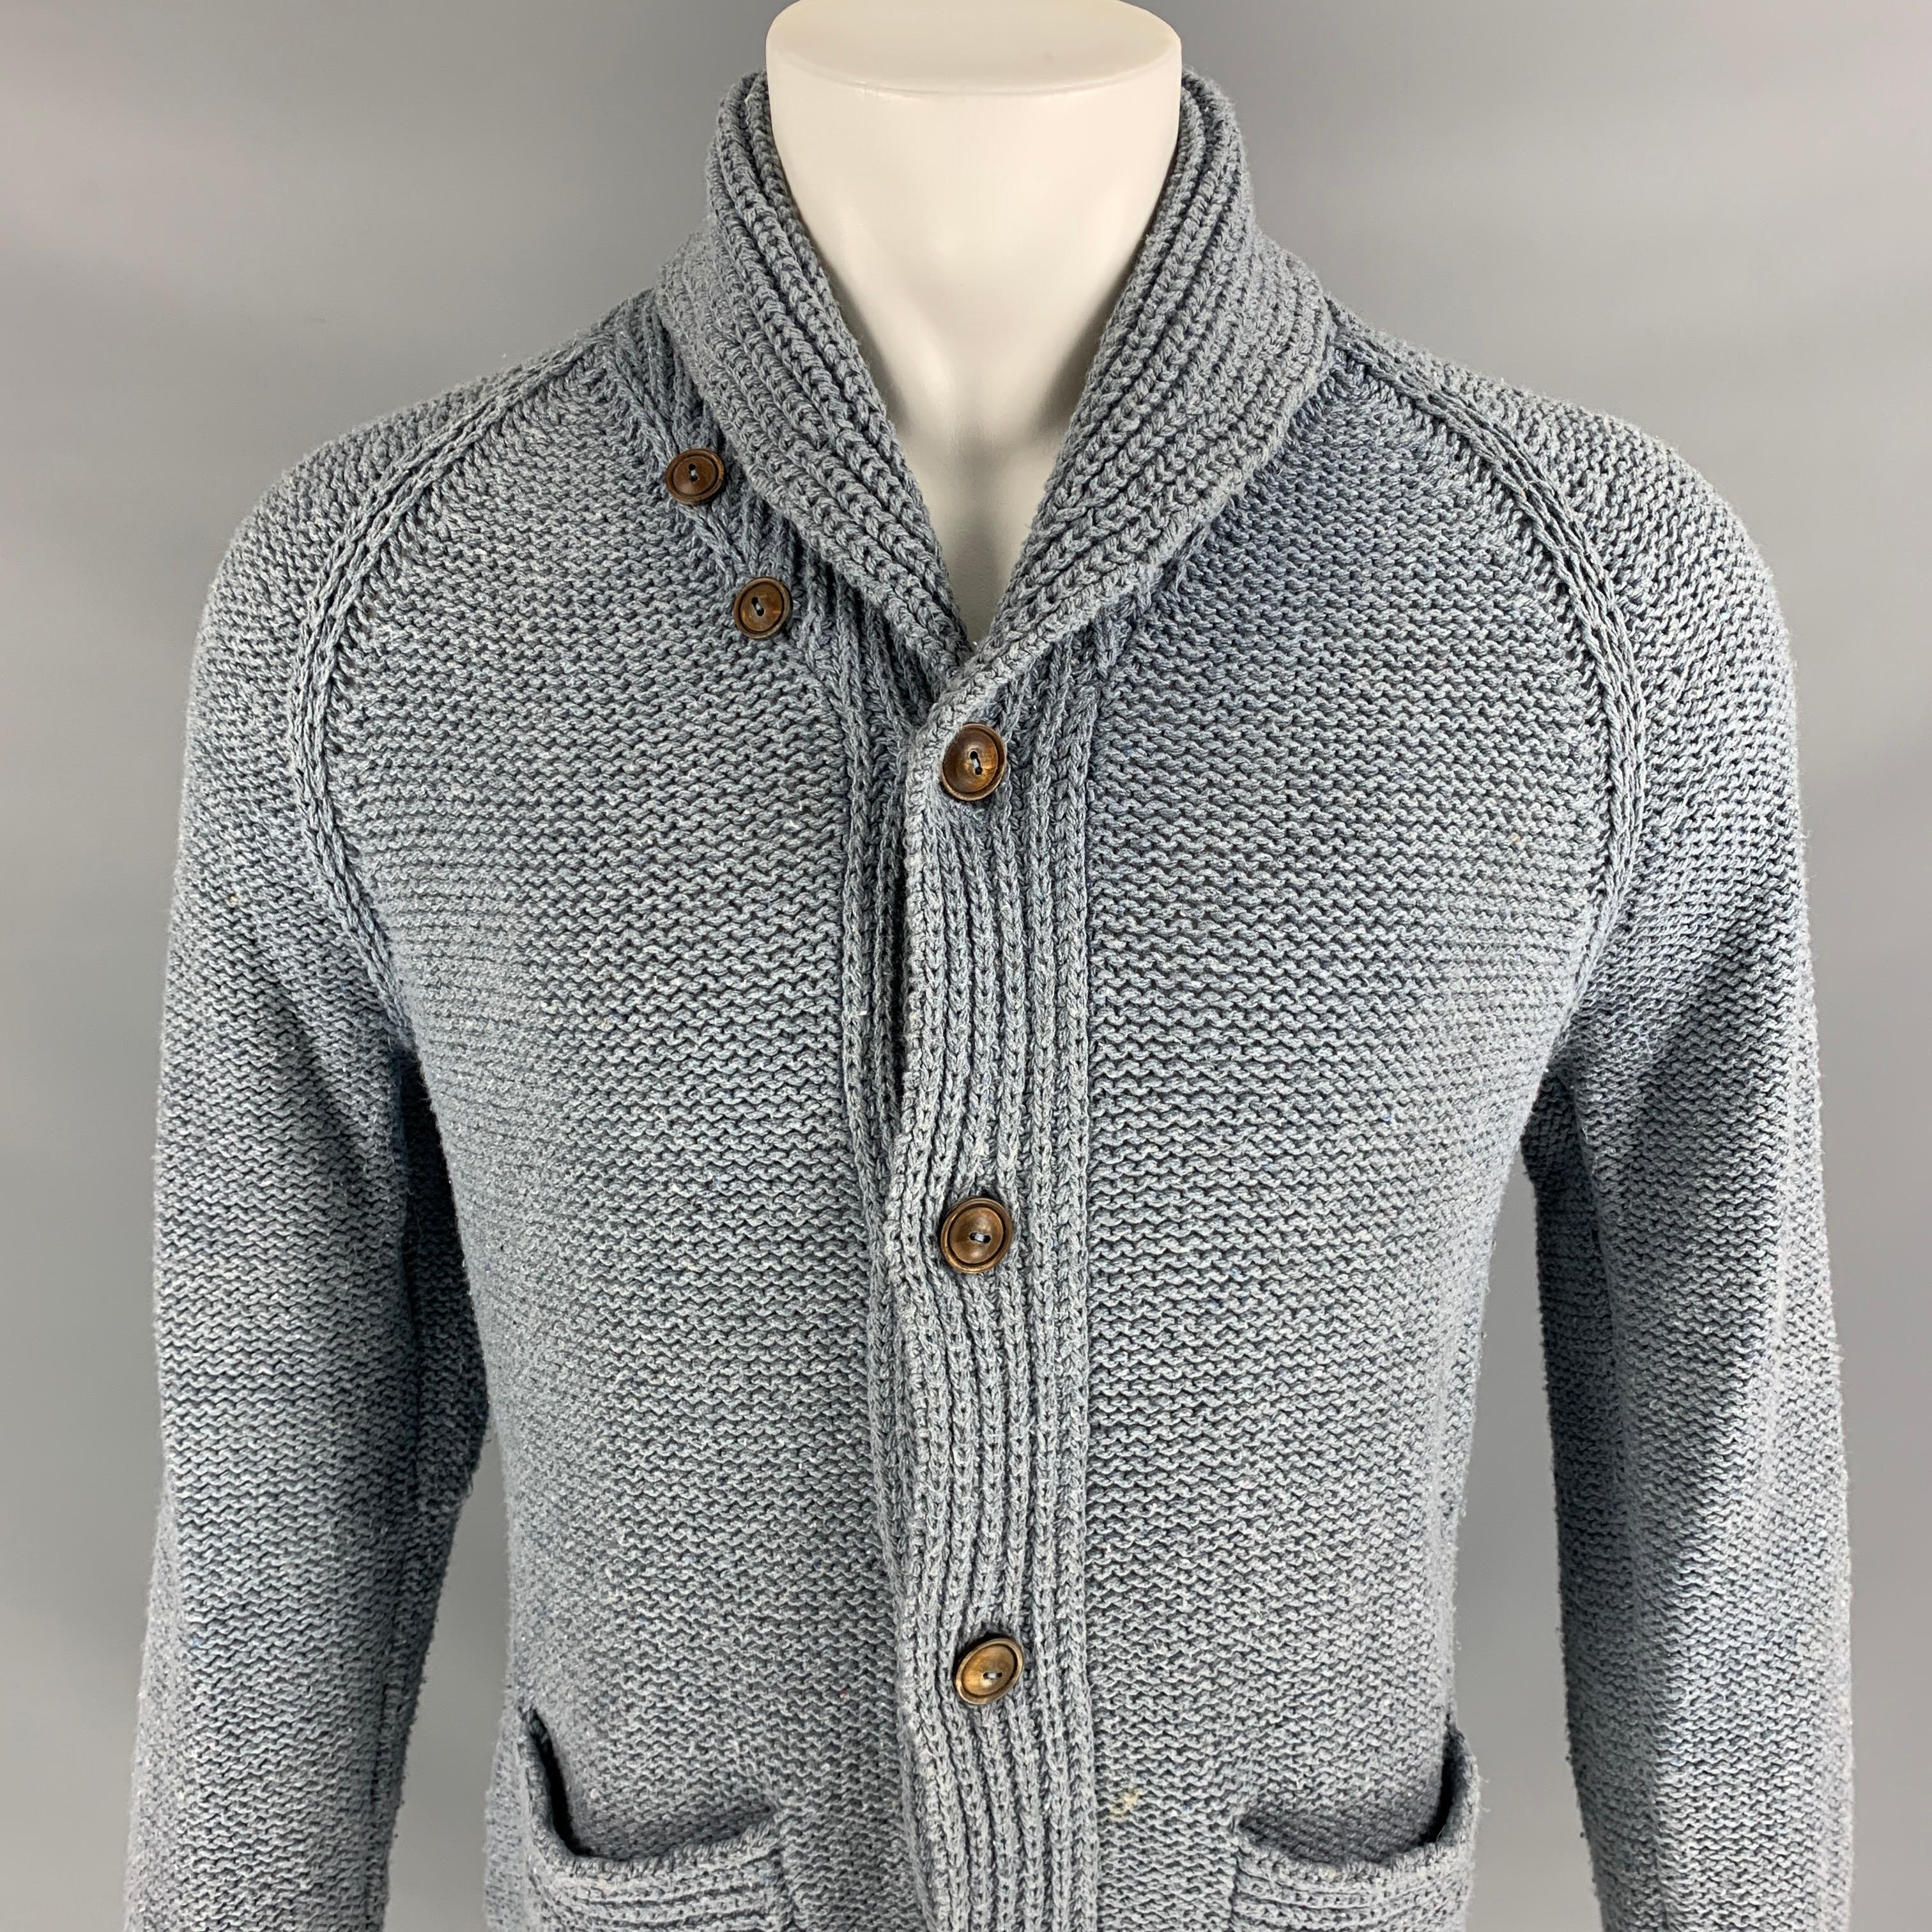 RRL by RALPH LAUREN jacket comes in a powder blue knitted cotton / polyester featuring a shawl collar, front pockets, and a buttoned closure. 

Very Good Pre-Owned Condition.
Marked: M

Measurements:

Shoulder: 17 in.
Chest: 40 in.
Sleeve: 23.5